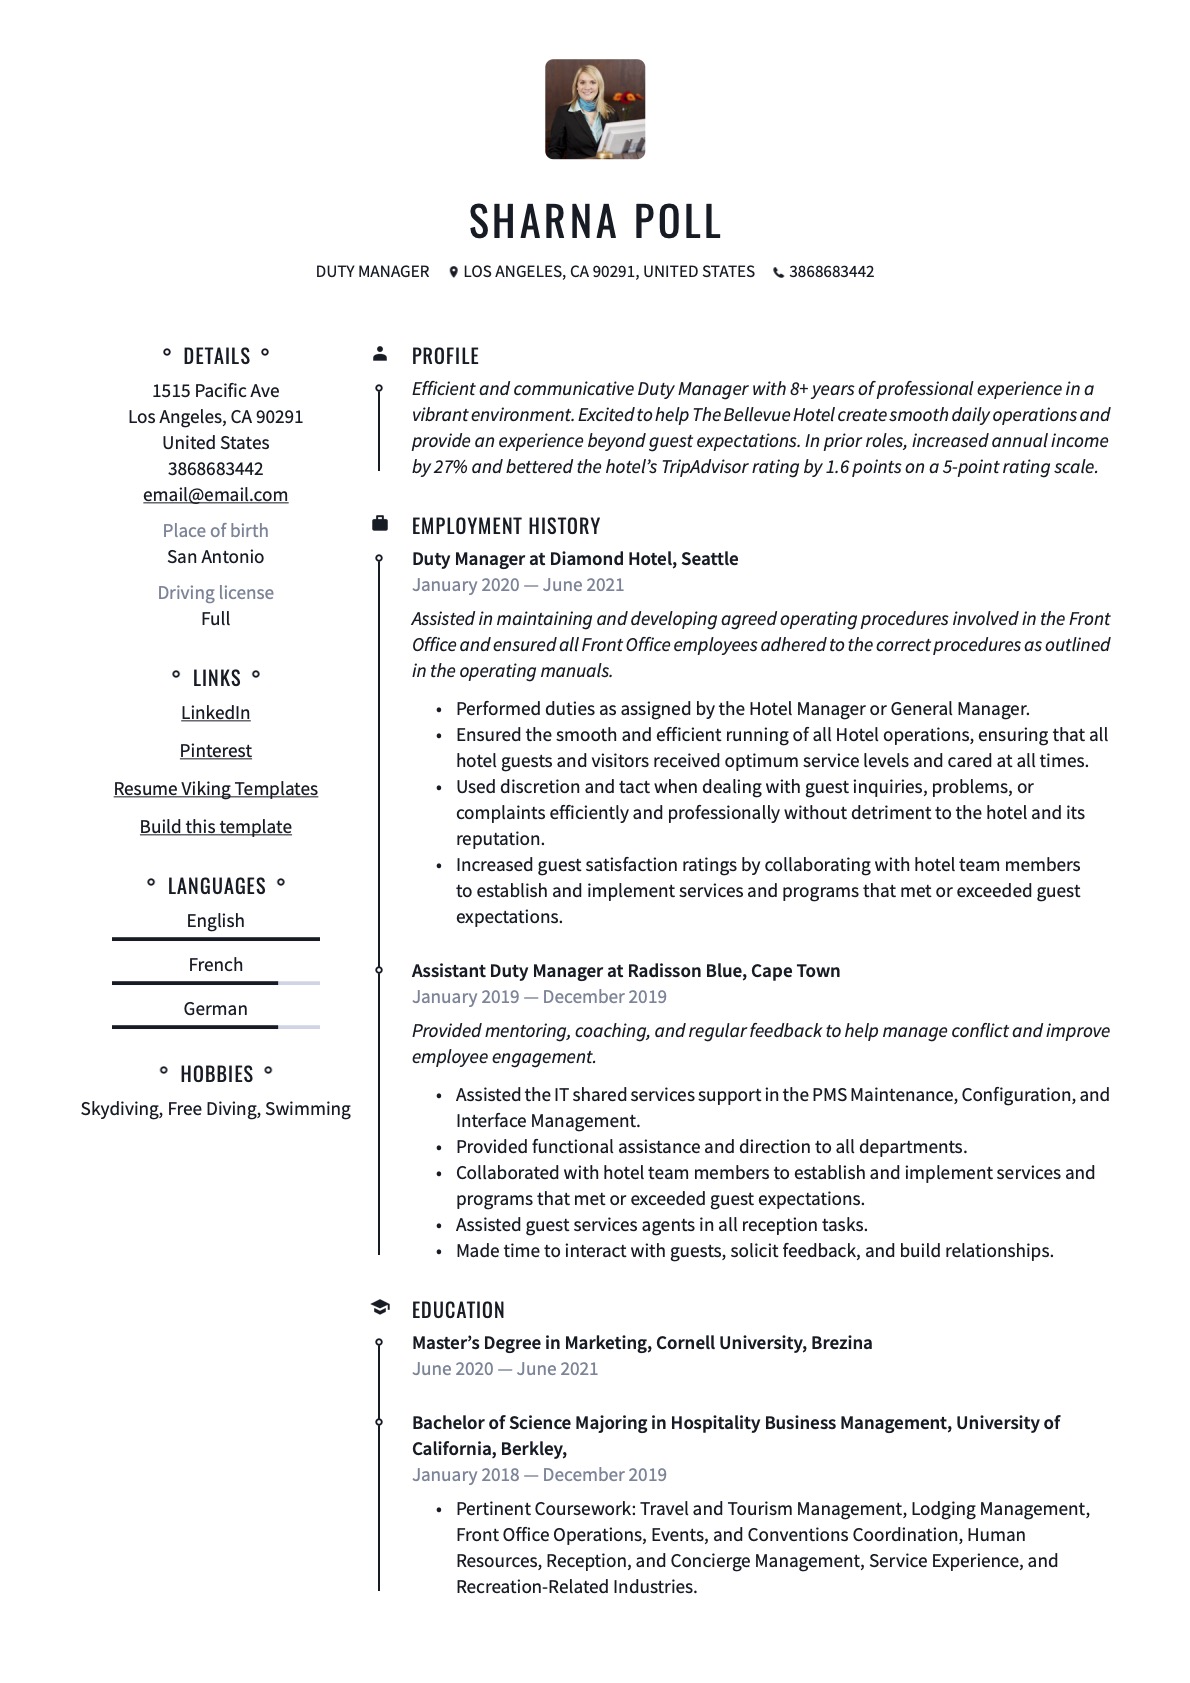 Duty Manager Resume Example